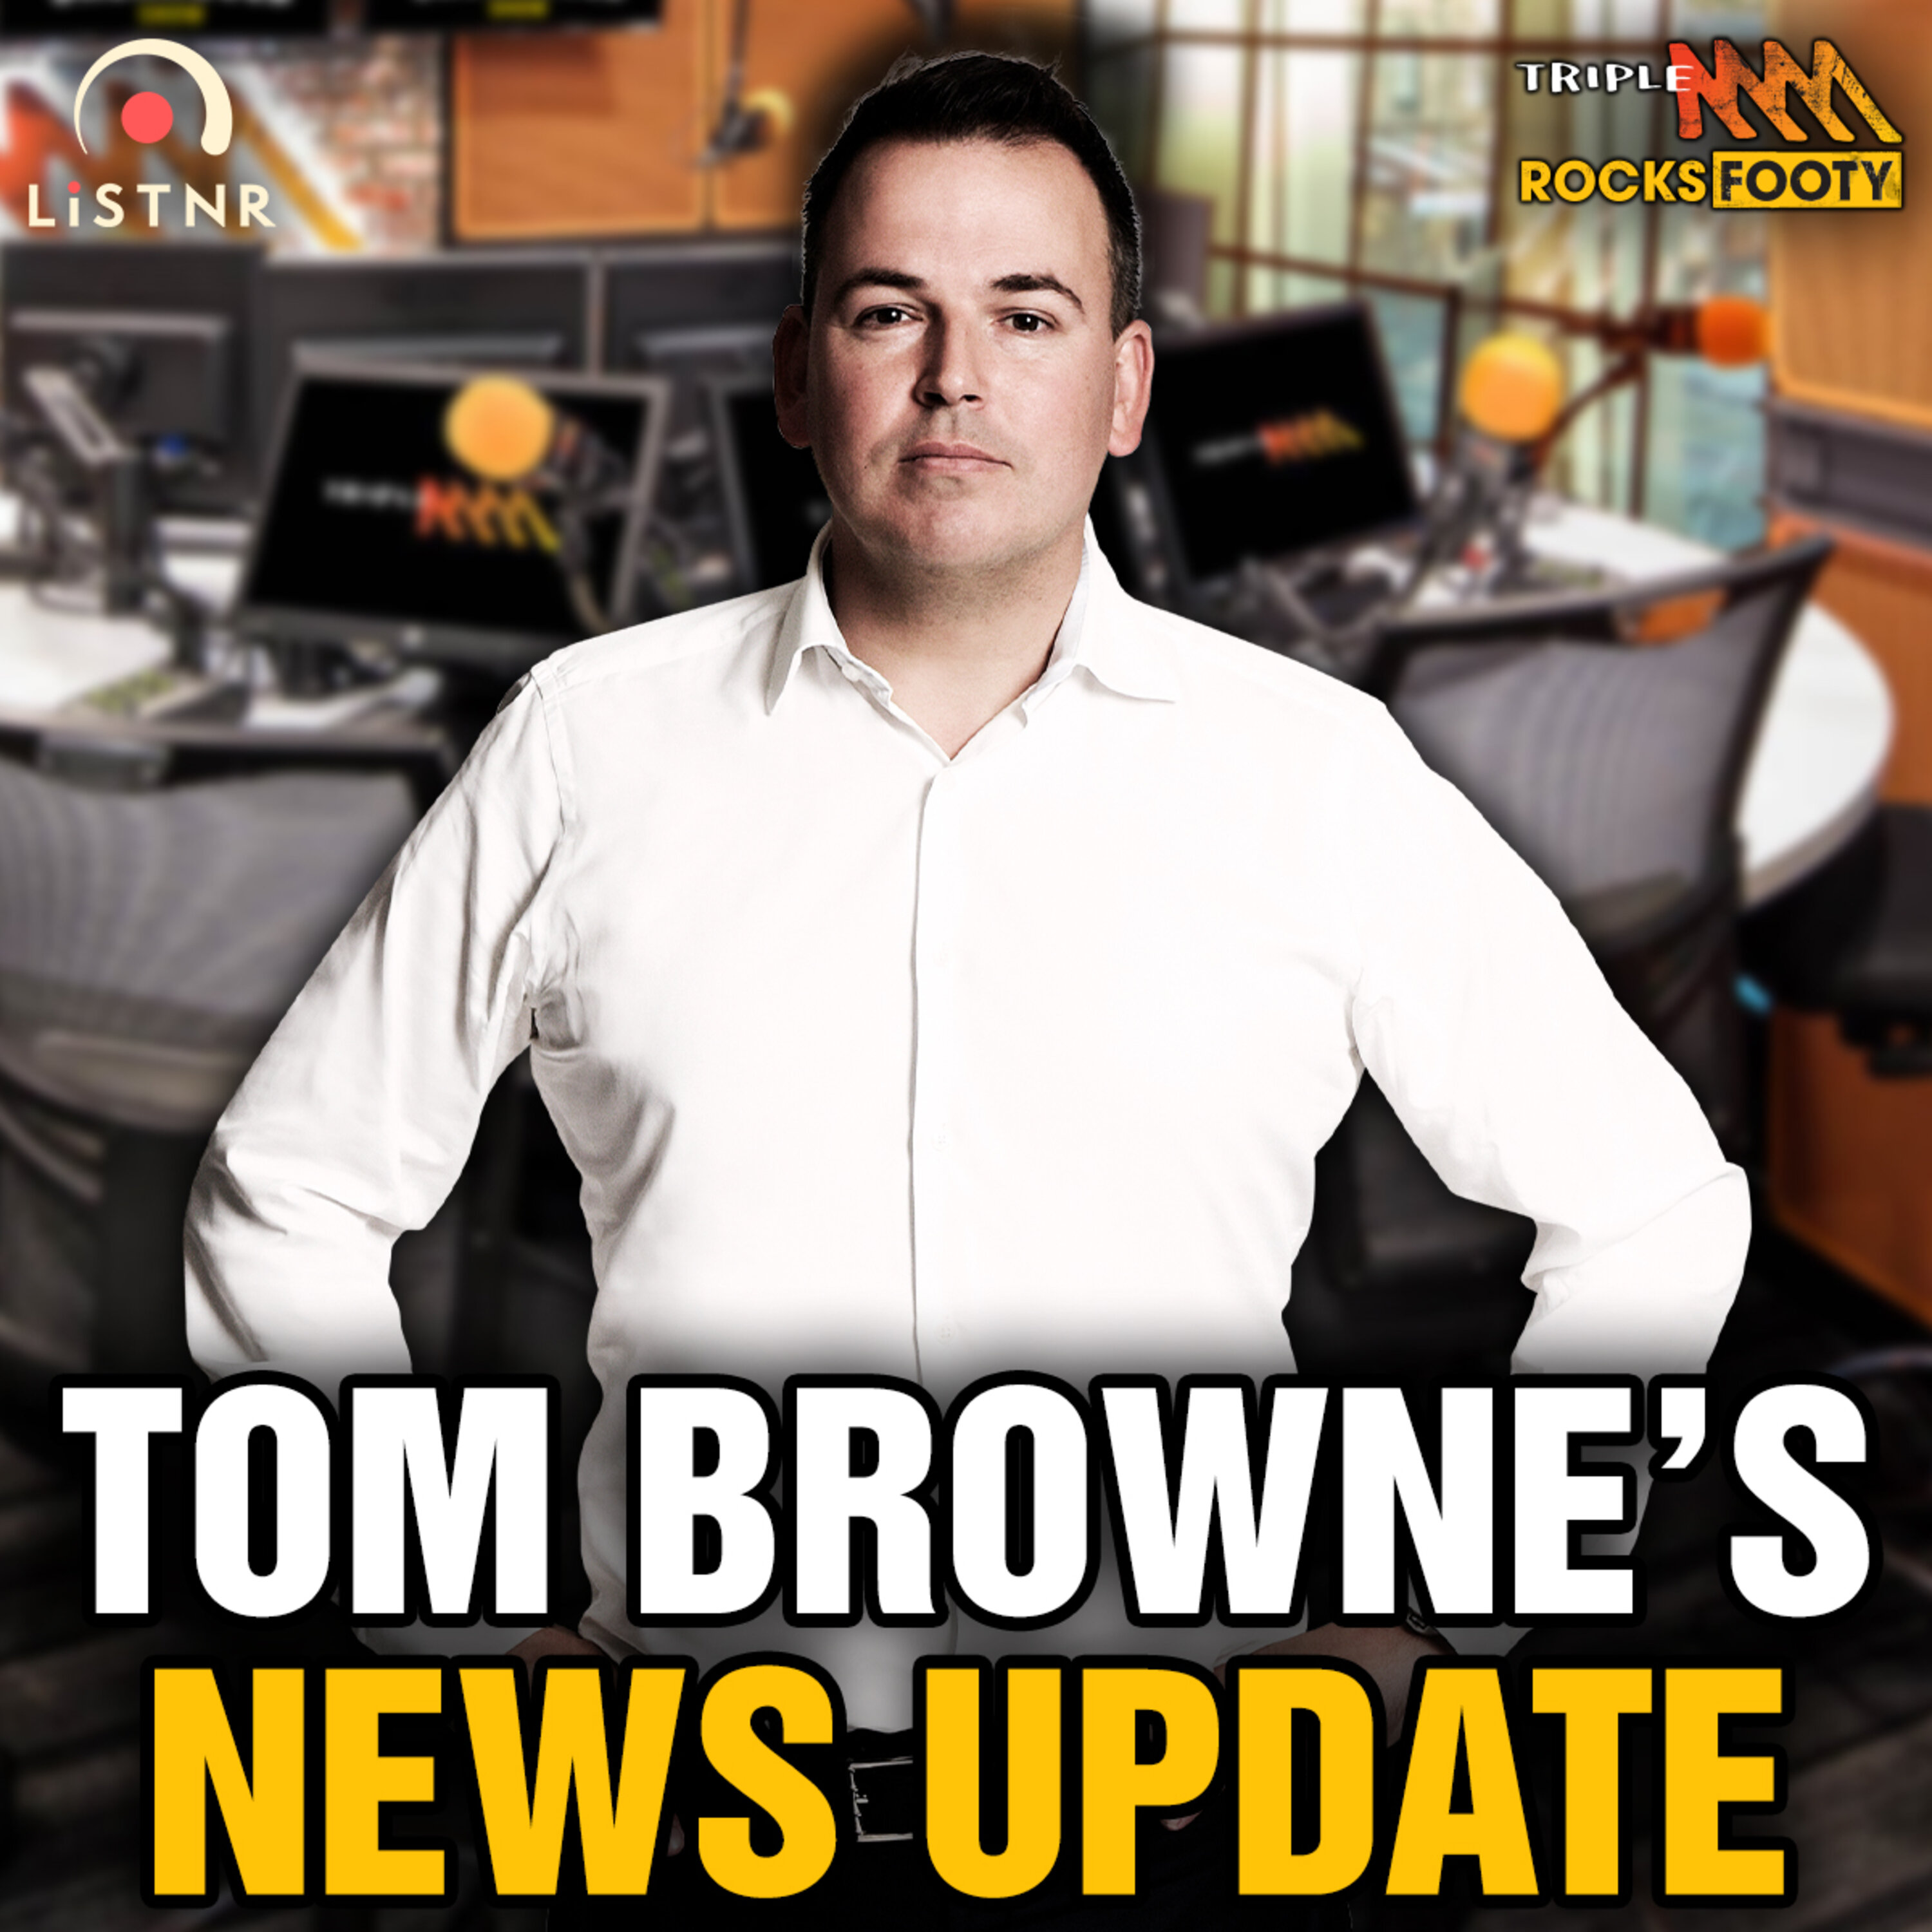 Tom Browne's News | Fallout from Brisbane's wild win over Richmond, Ben Amarfio resigns, ARC score review in focus,